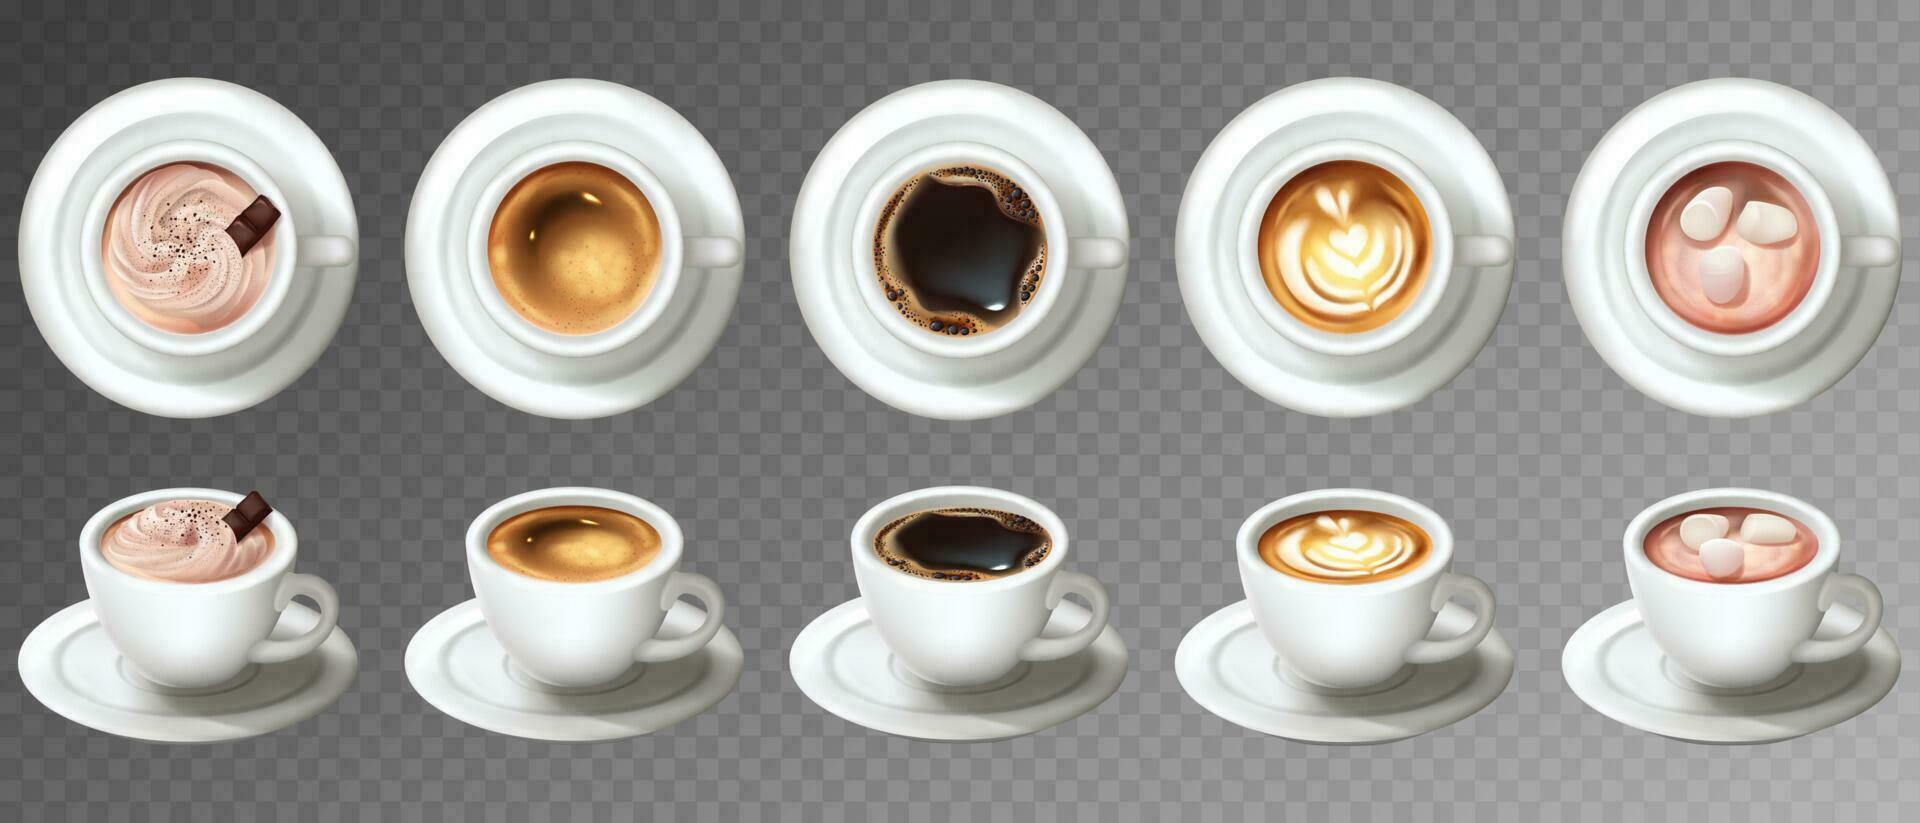 Realistic coffee cups set. Collection of realism style drawn sorts of drinks hot beverages latte cappuccino espresso americano from side view mockup. Illustration of 3d mugs tea liquid for cafe menu. vector